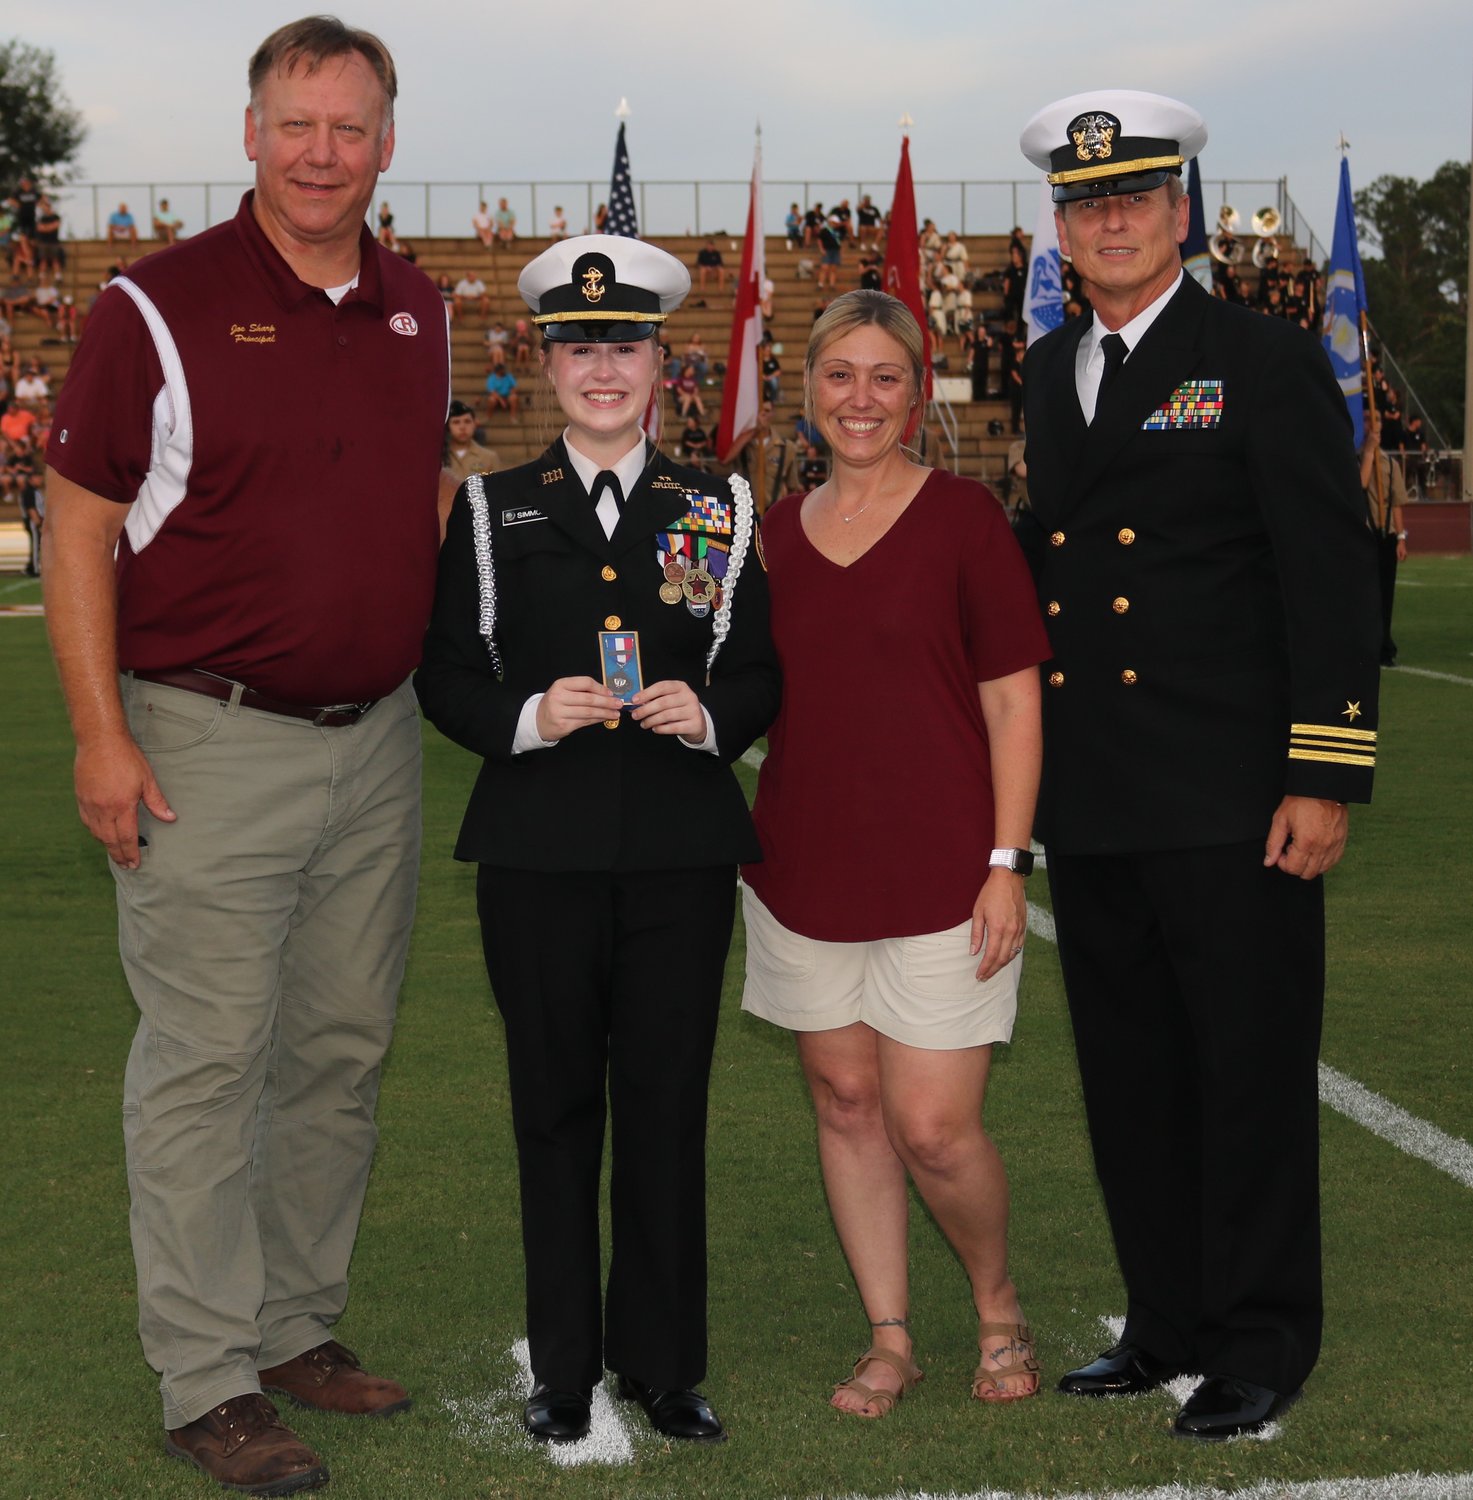 Cadet Ashlynn Simmons is the fourth member of the Robertsdale High School Naval ROTC in a row to receive the Legion of Valor Bronze Cross for Achievement, the highest honor a Navy Junior ROTC cadet can earn. He is pictured with her mother, RHS Principal Joe Sharp and RHS NJROTC Commander Frank Starr.